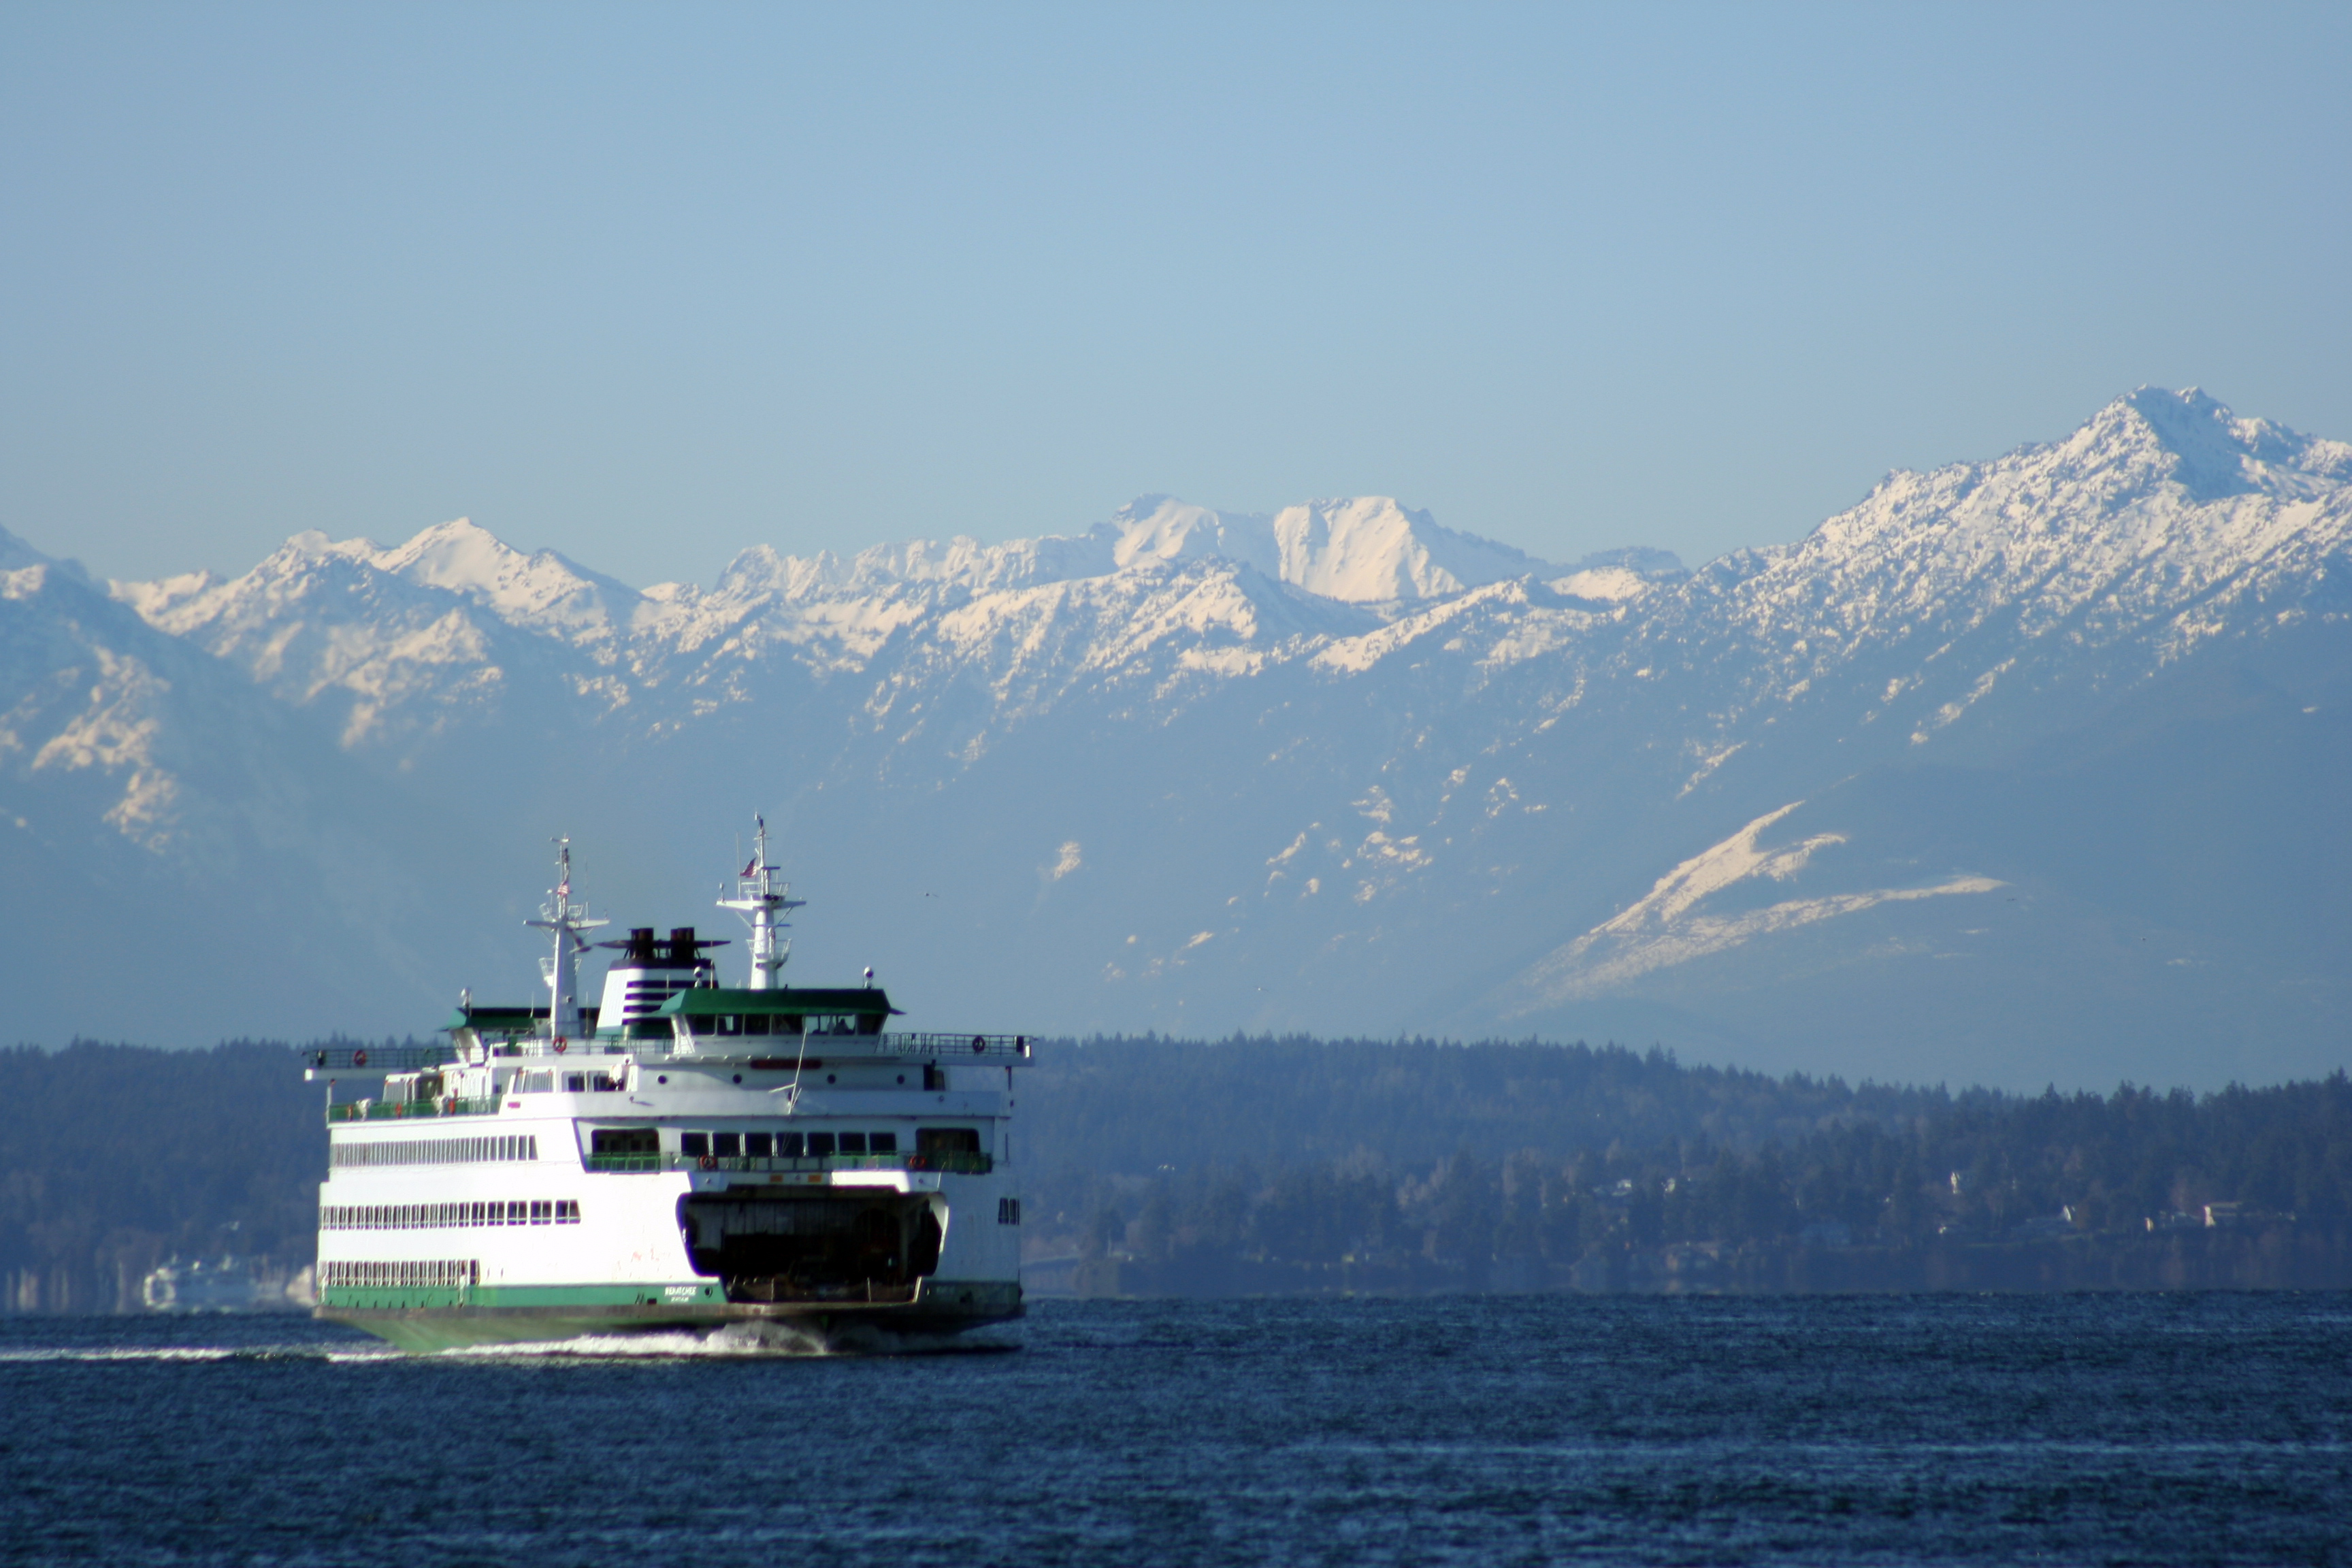 A ferry operating on open water with mountains in the background.